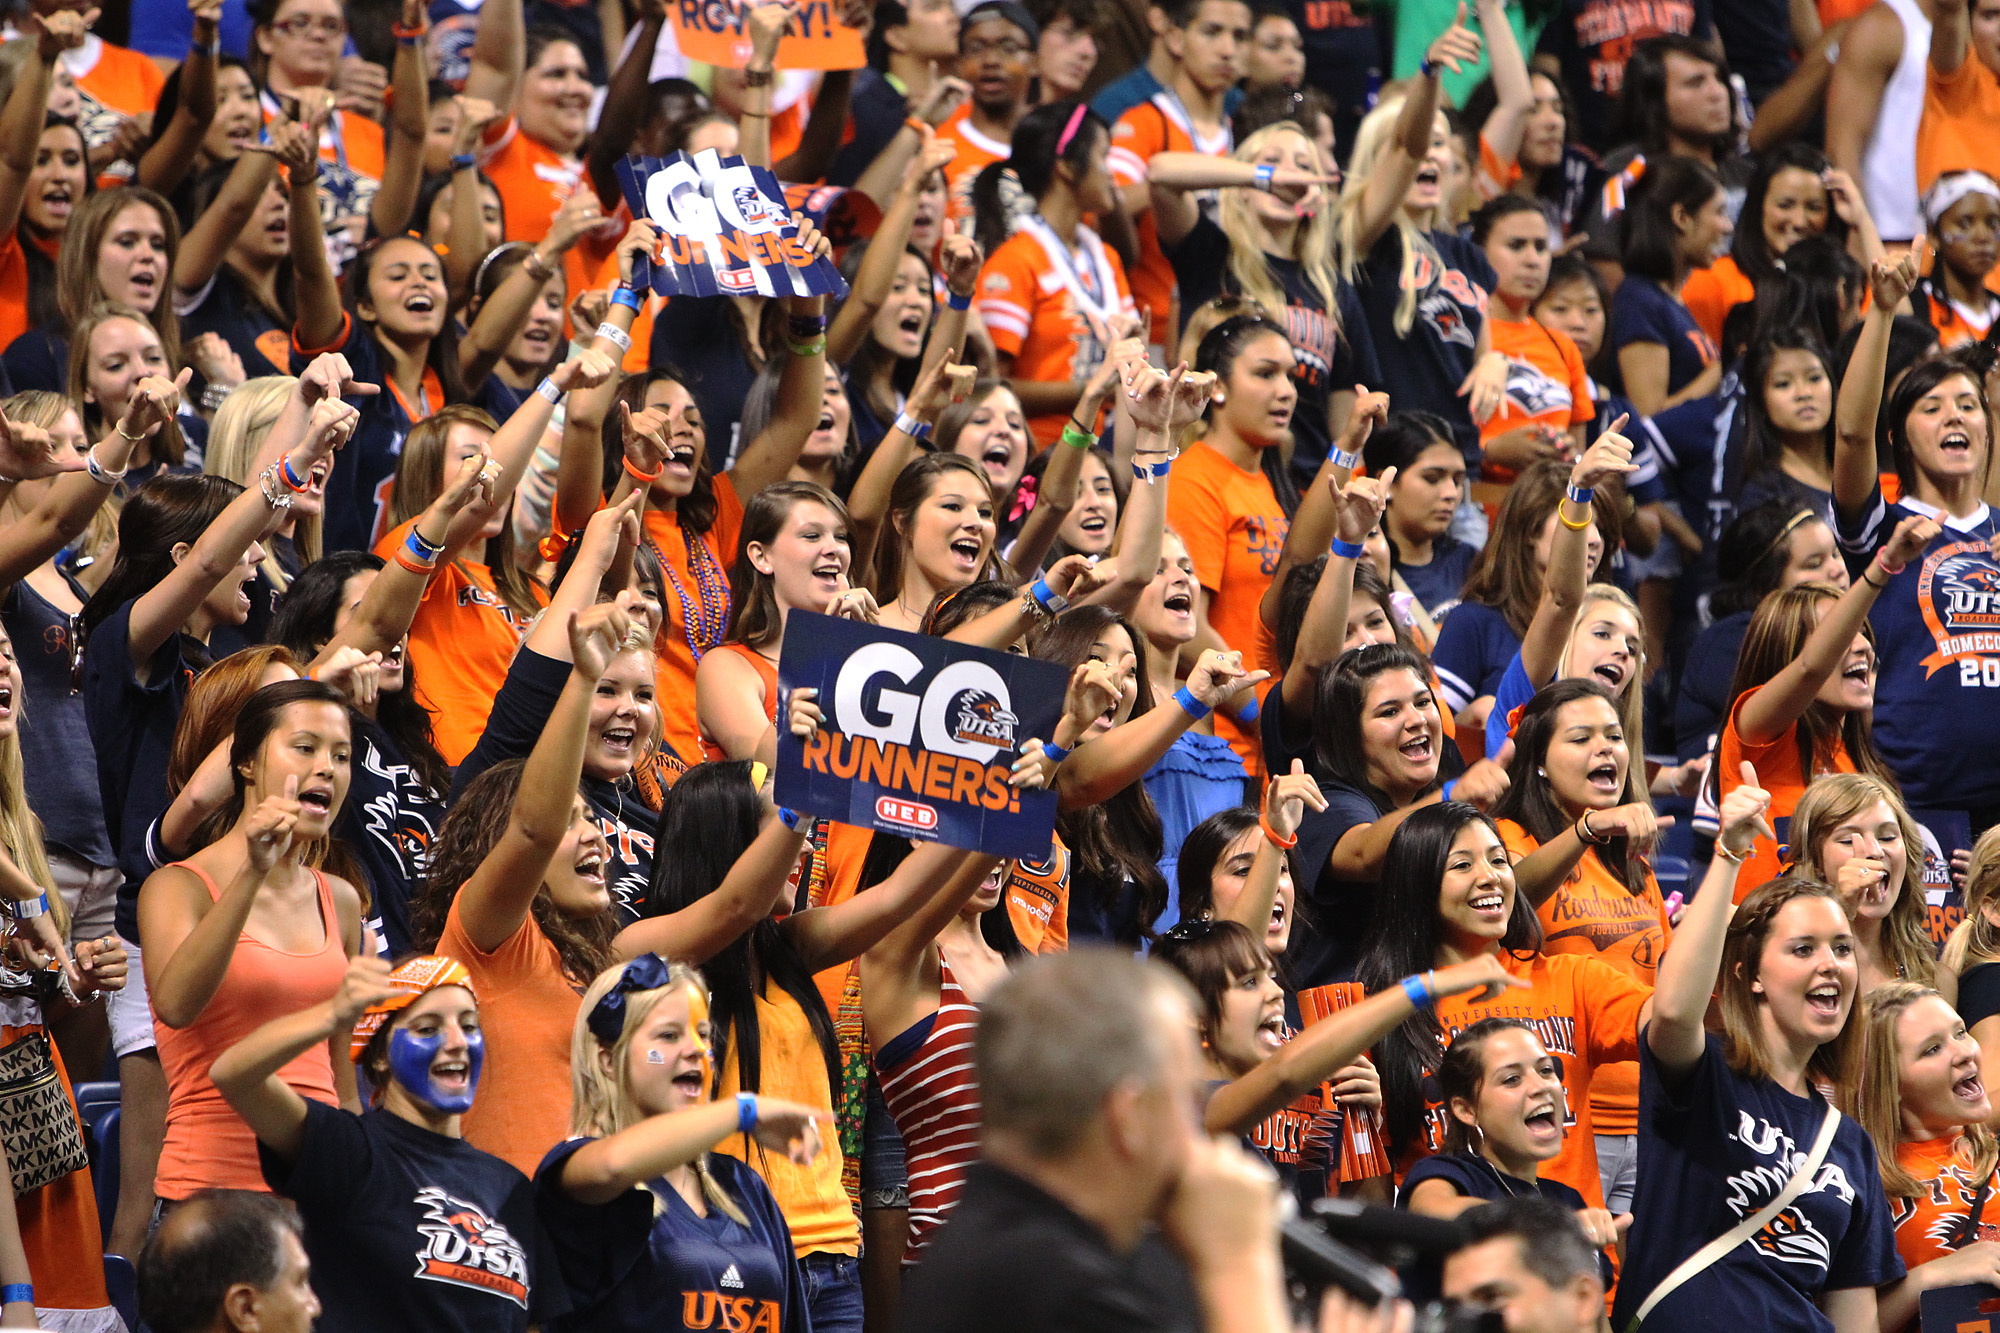 7 UTSA traditions to know ahead of Frisco Bowl against San Diego State